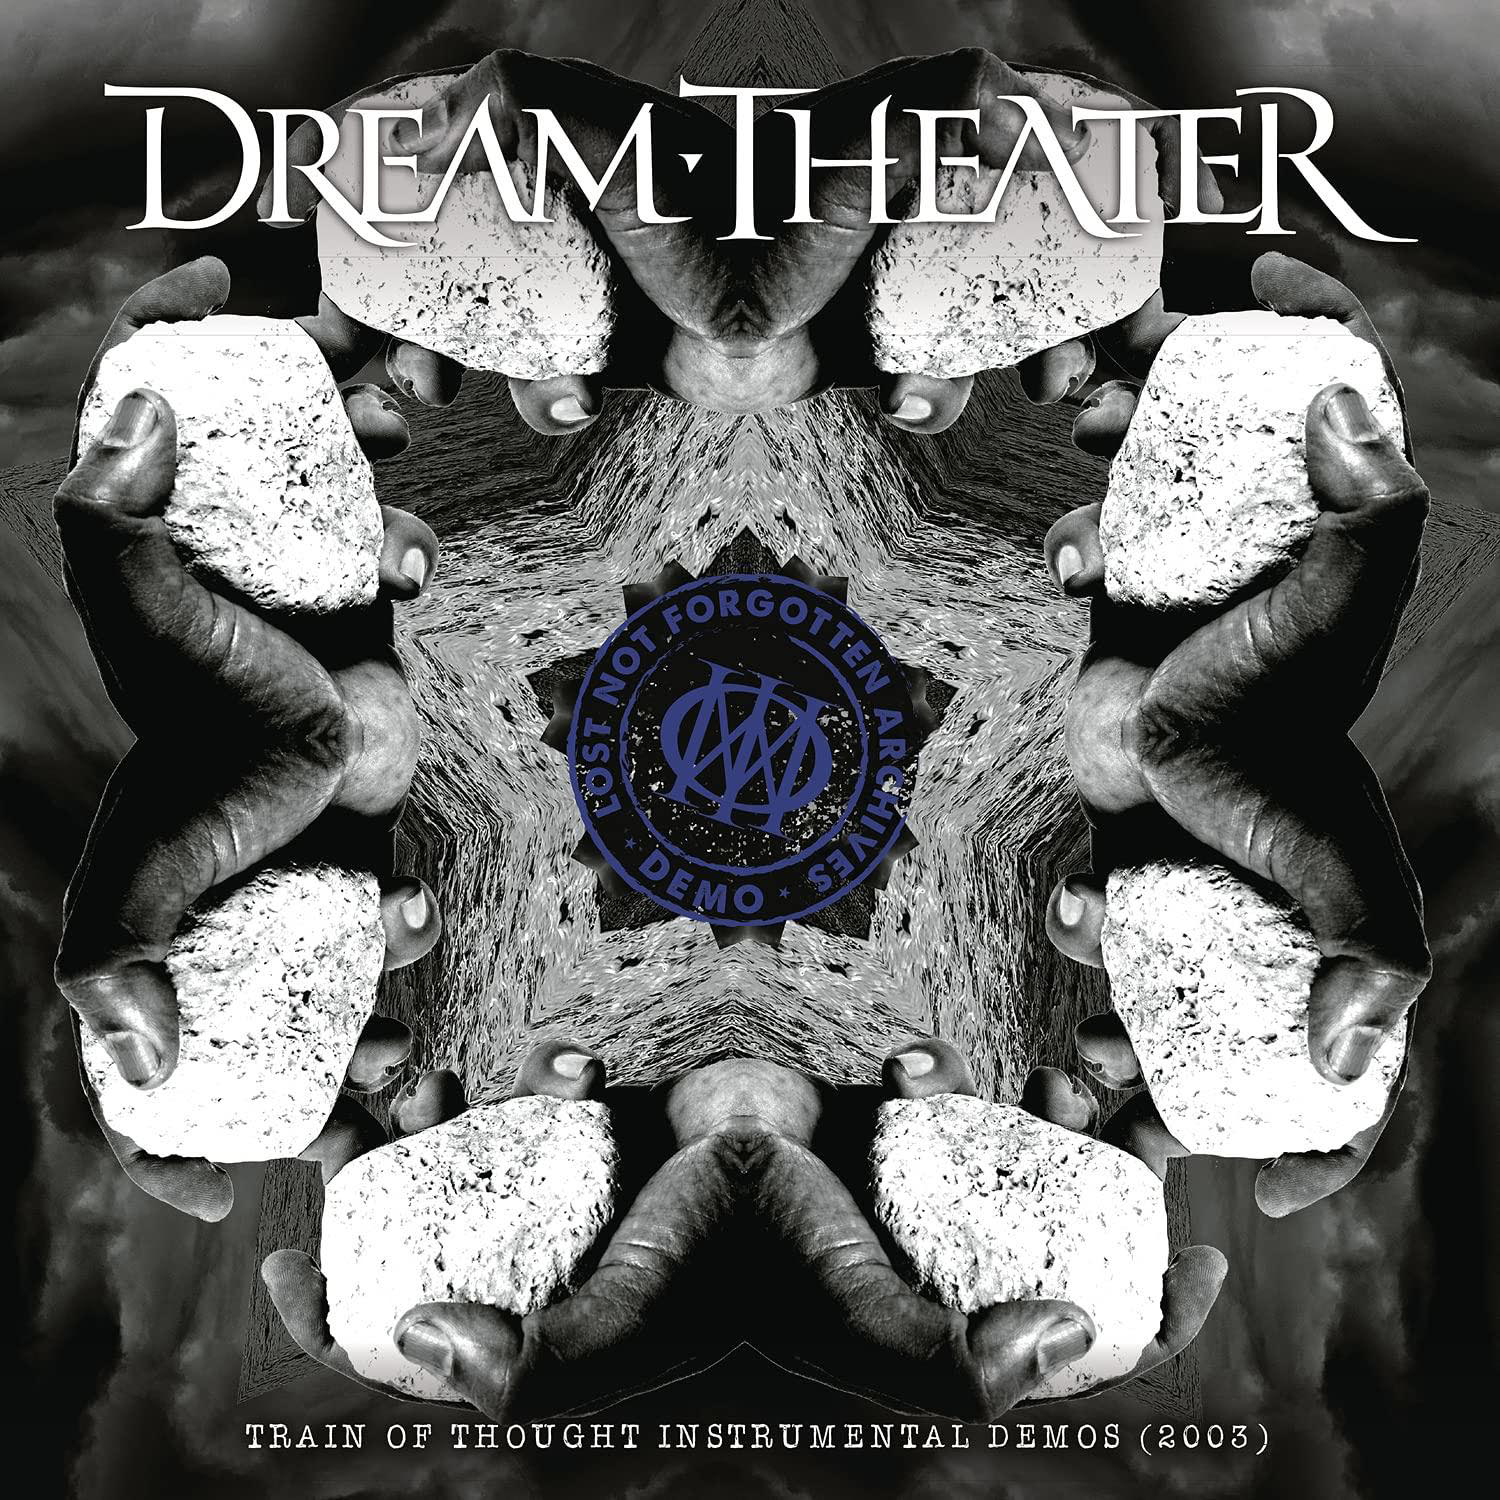 Dream Theater - LOST NOT + TRAIN THOUGHT INST Bonus-CD) (LP ARCHIVES: FORGOTTEN - OF